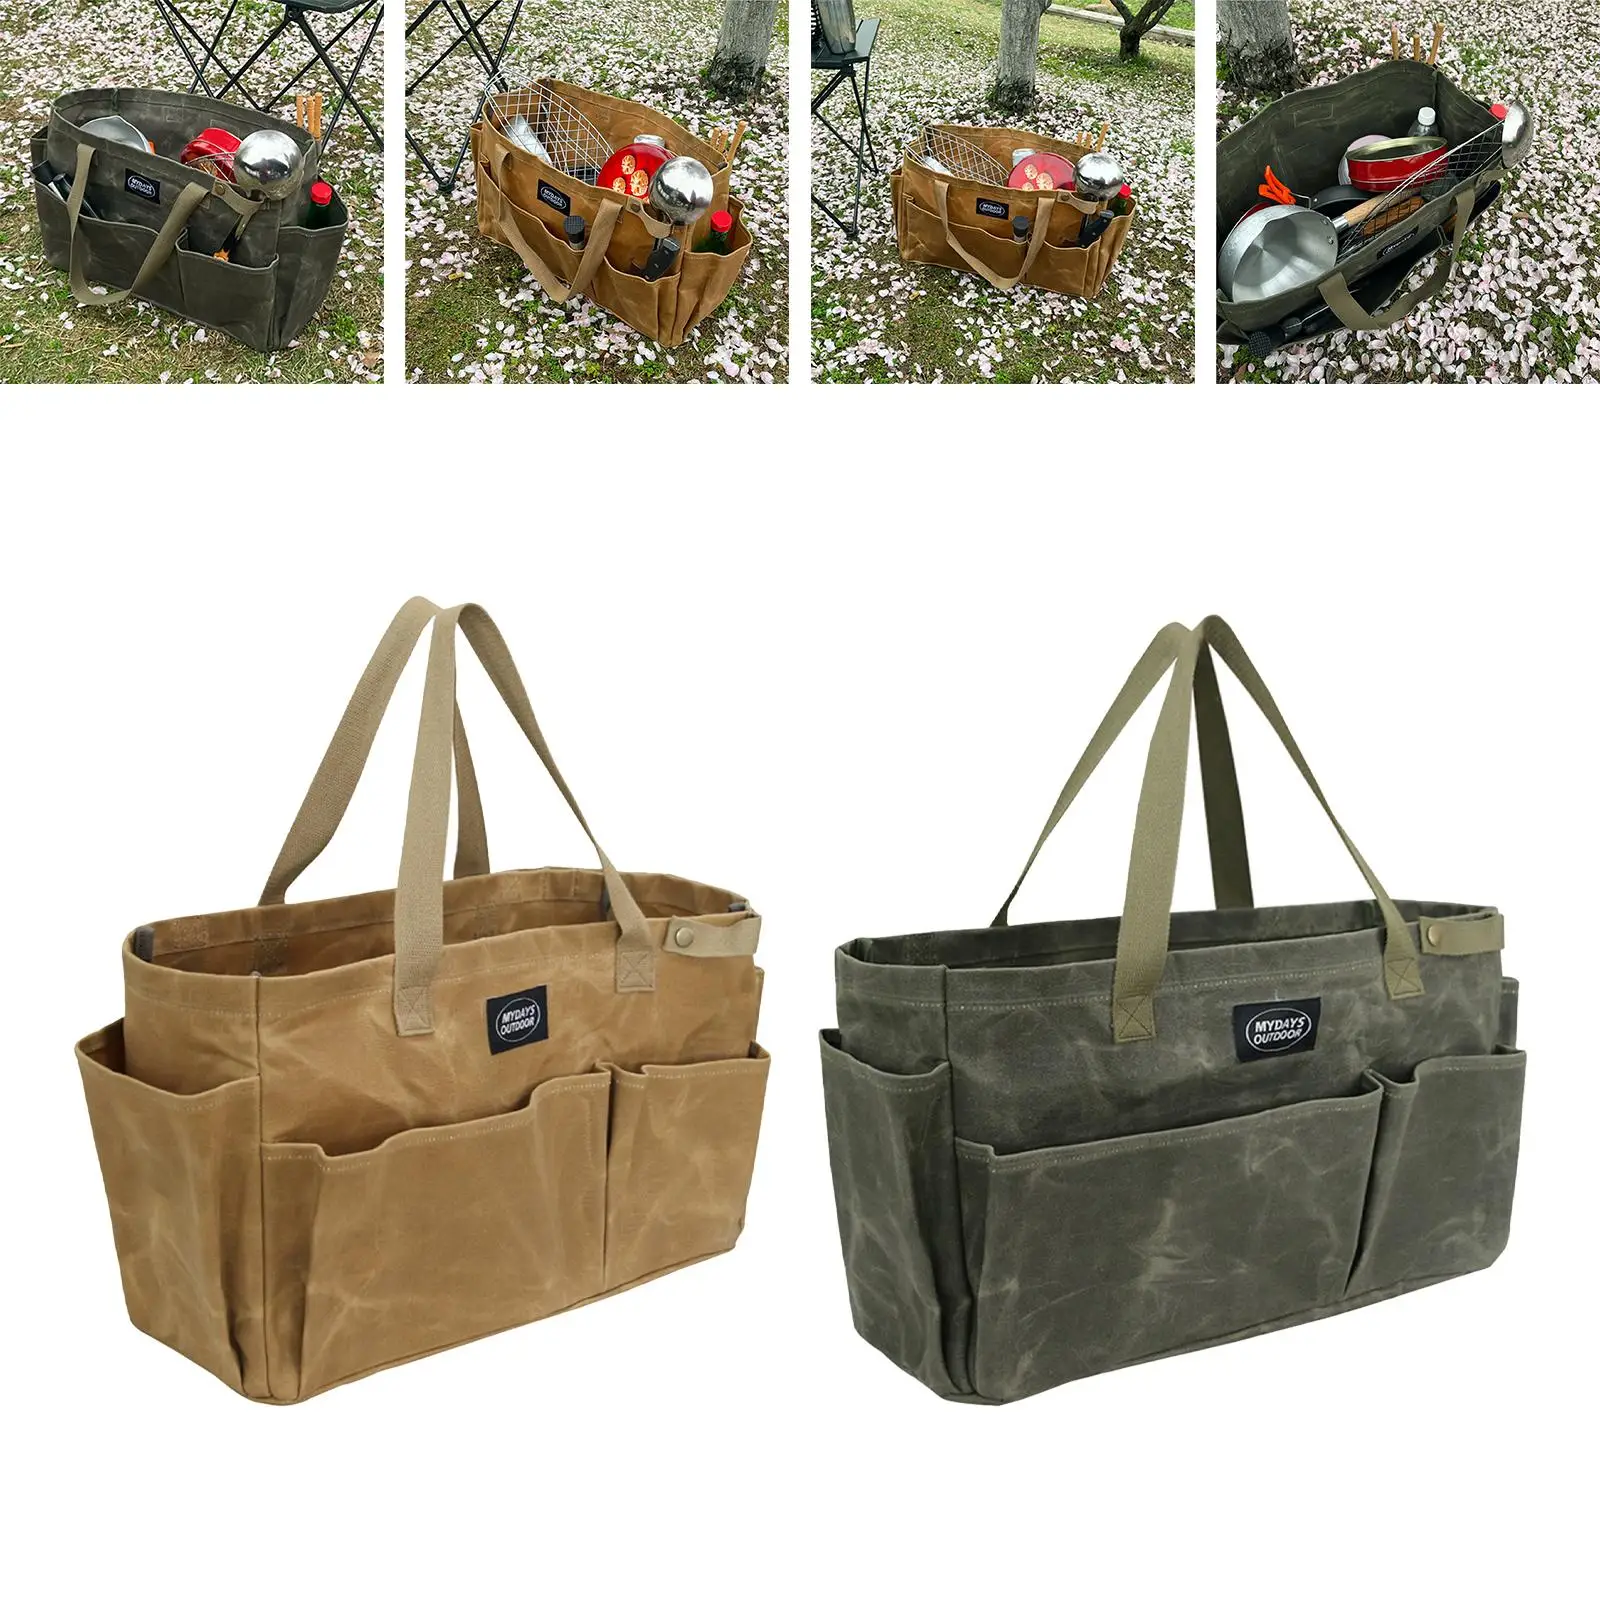 Camping Gear Storage Bag Basket with Outside Pockets Stuff Carrier Utility Tote Bag for Beach Barbecue Picnics Fishing Groceries